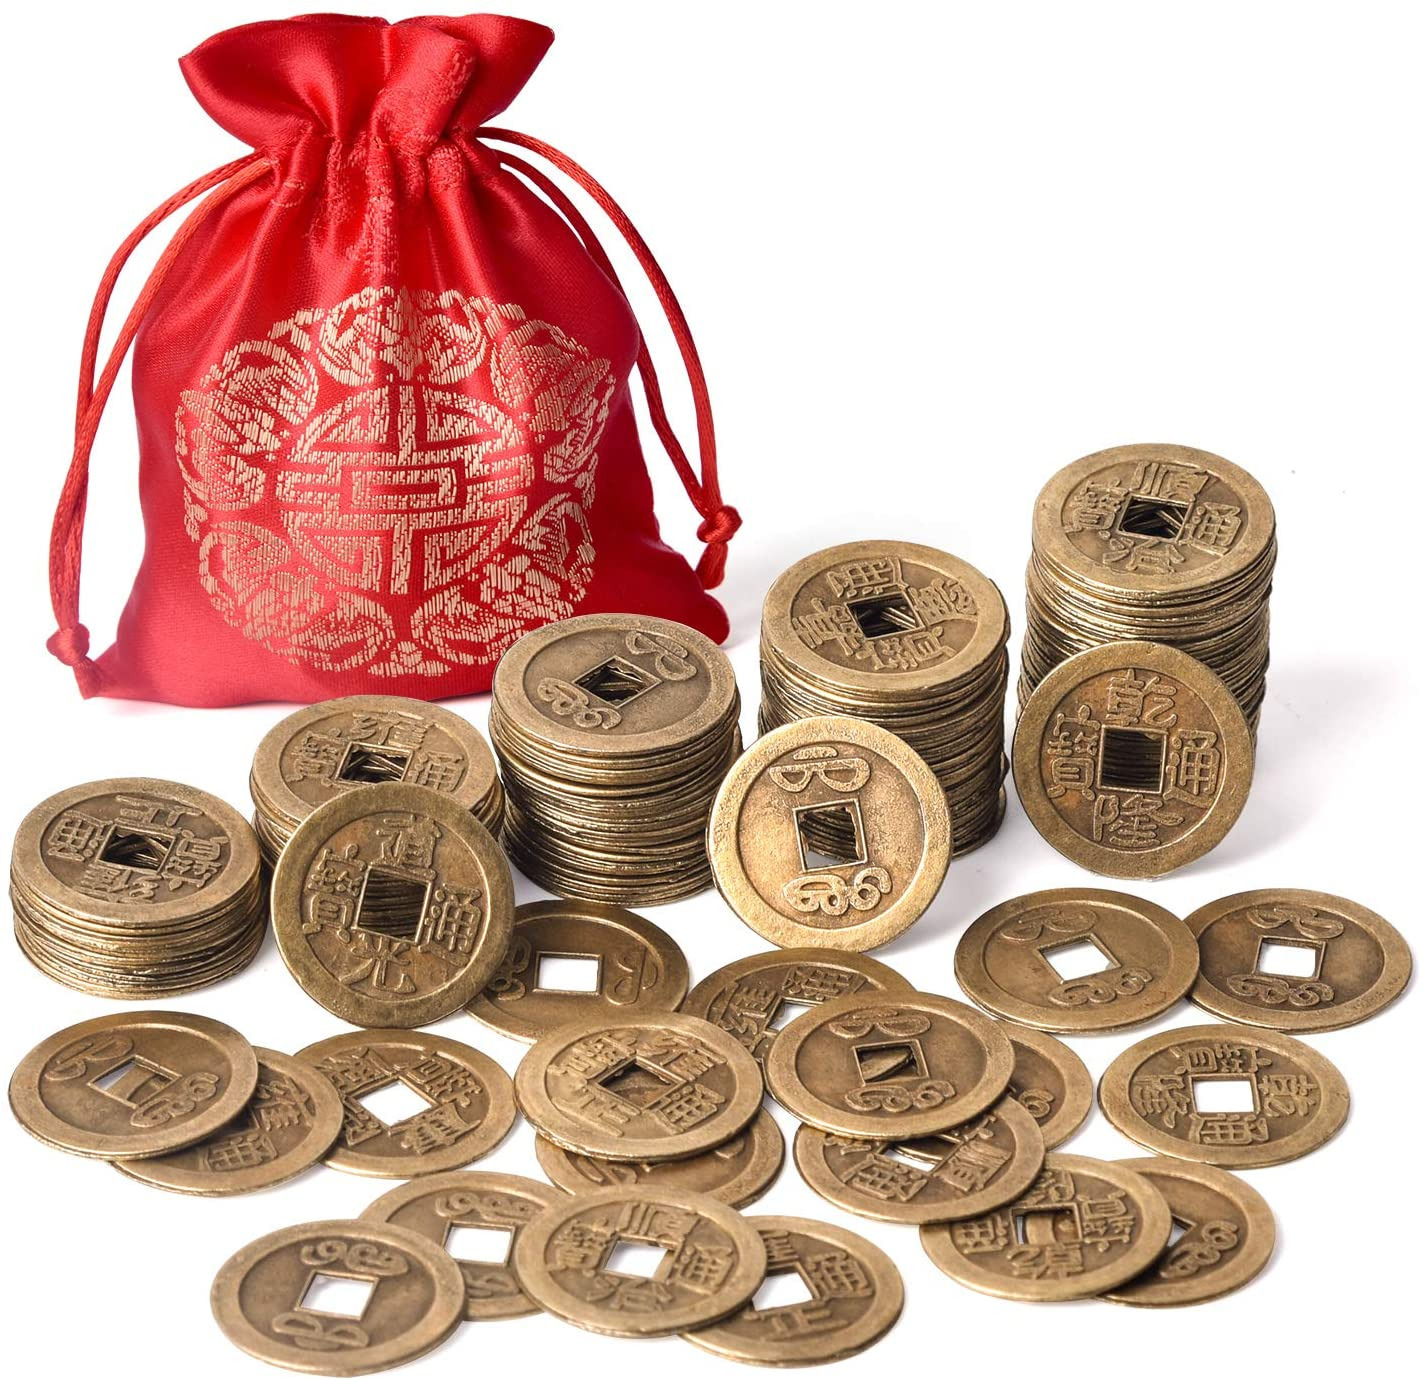 120 Pieces Chinese Fortune Coins Feng Shui I-ching Coins Chinese Good Luck